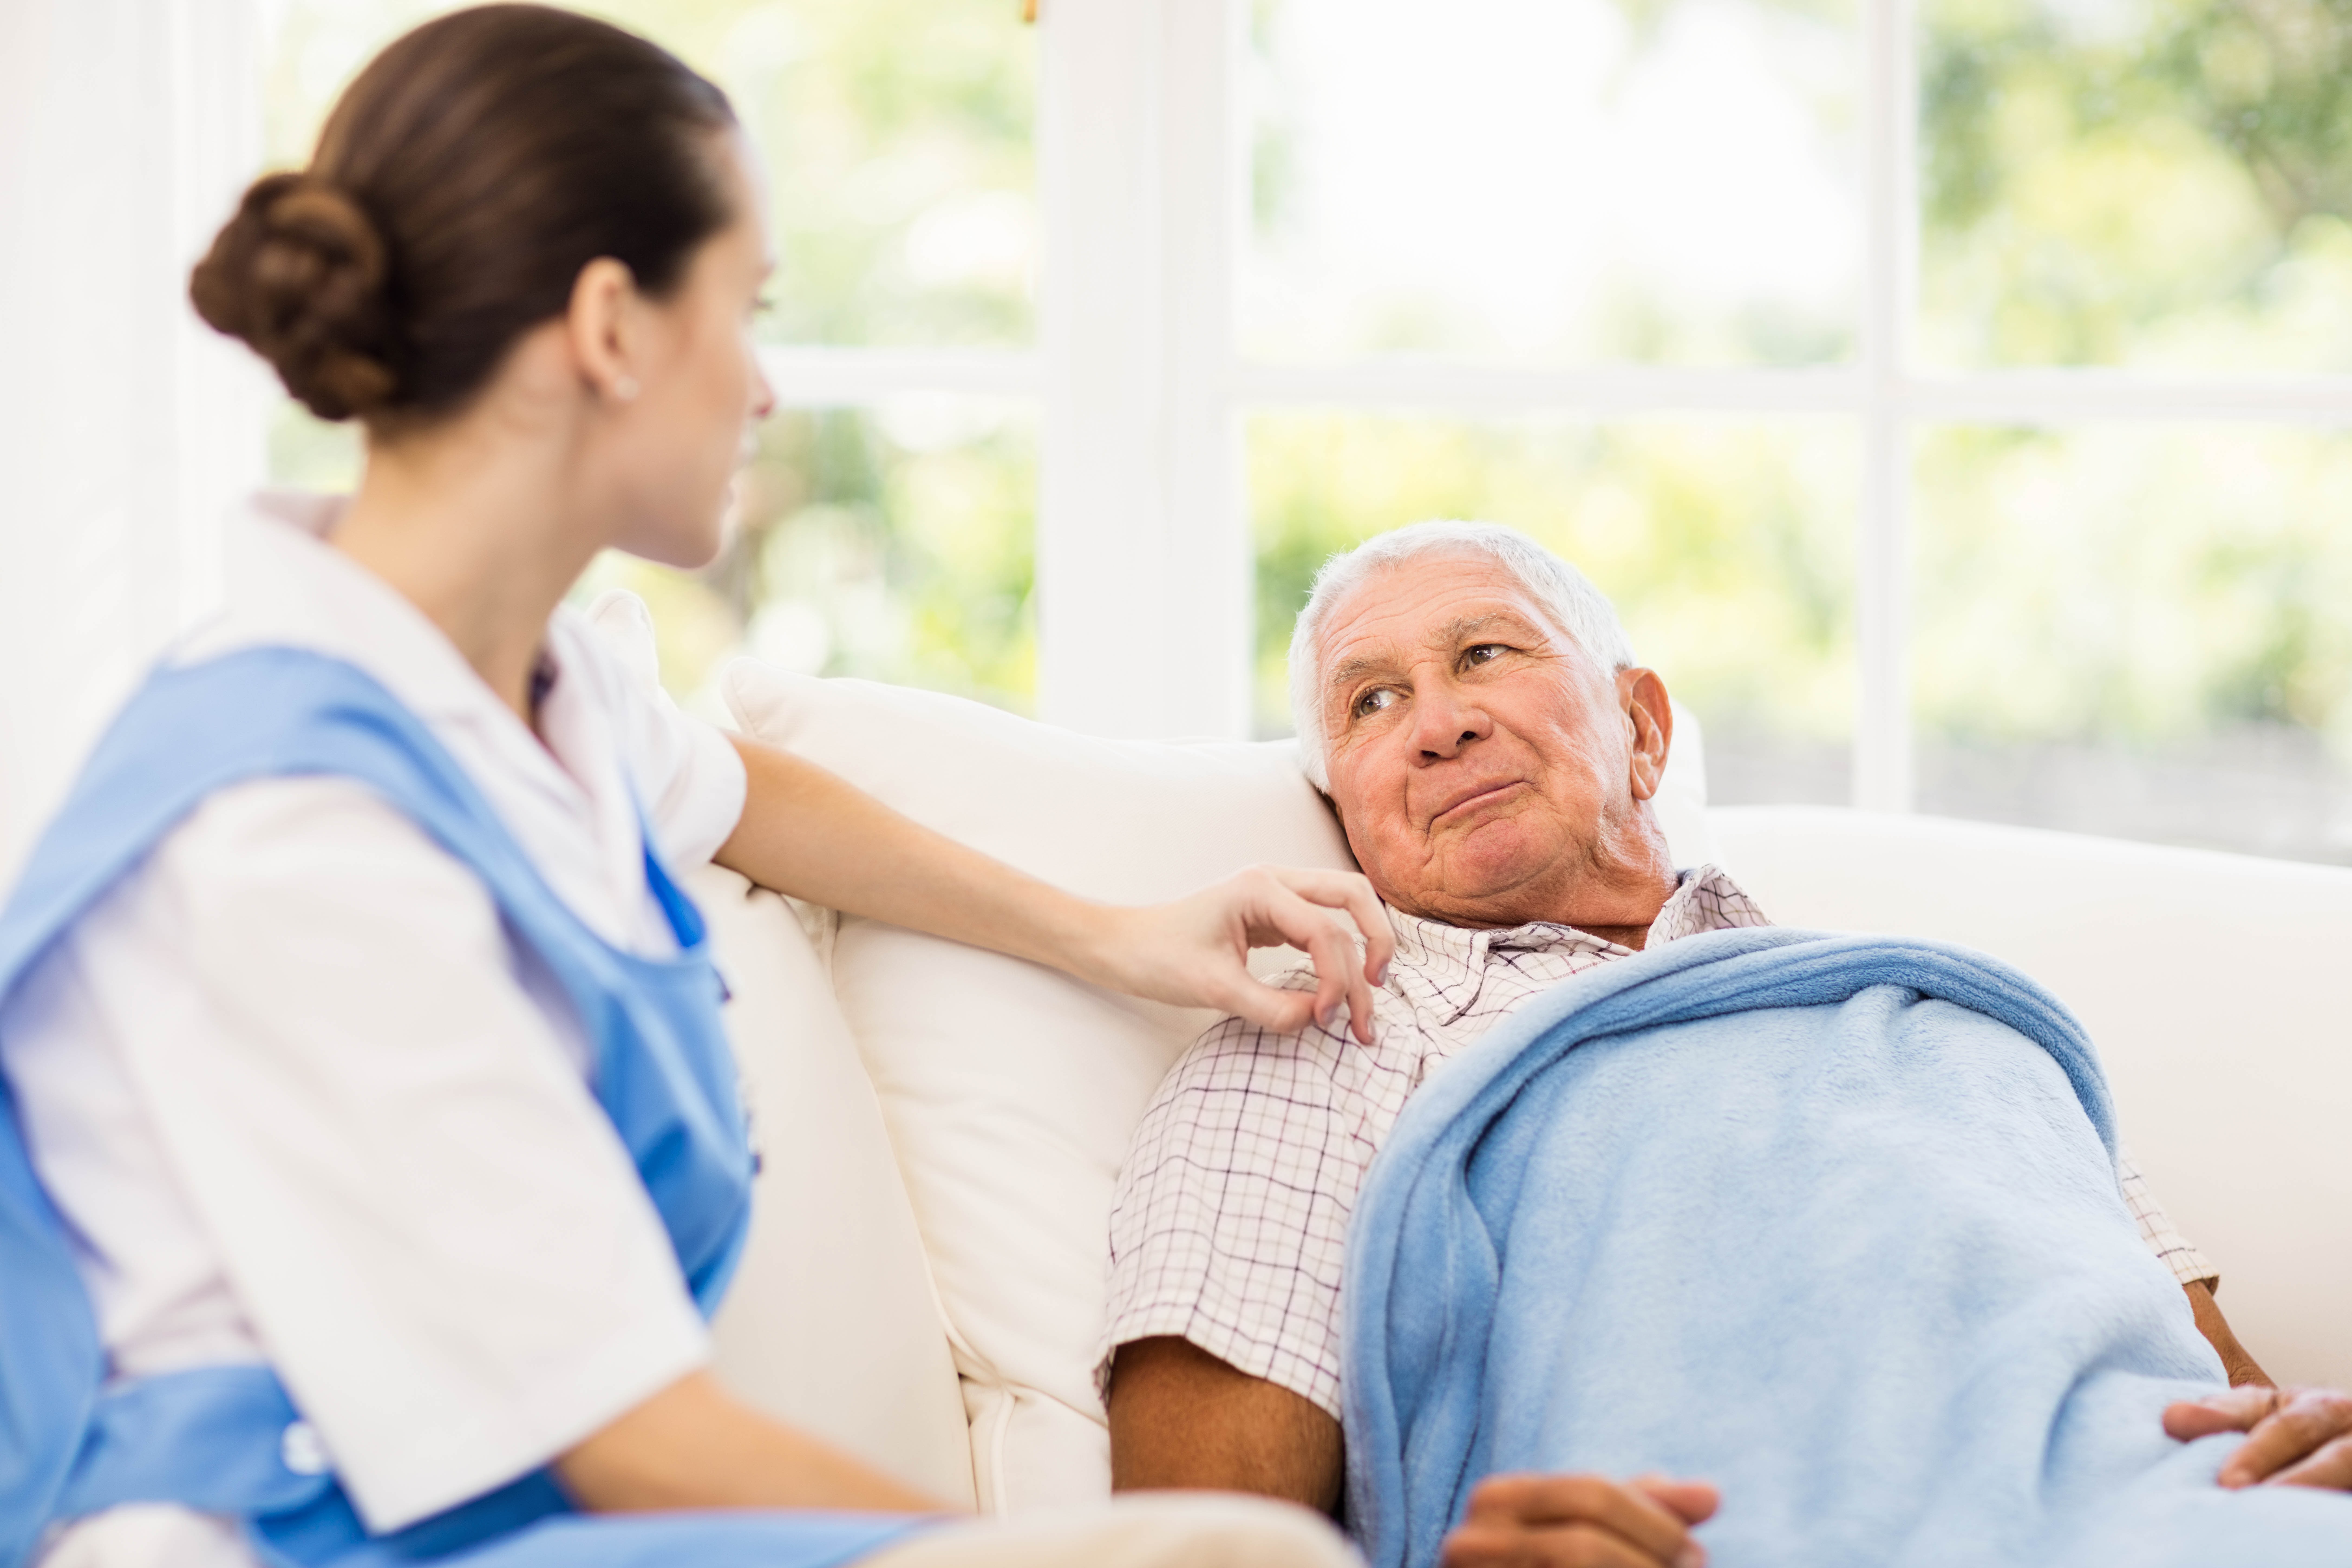 Medicare rules for home health care